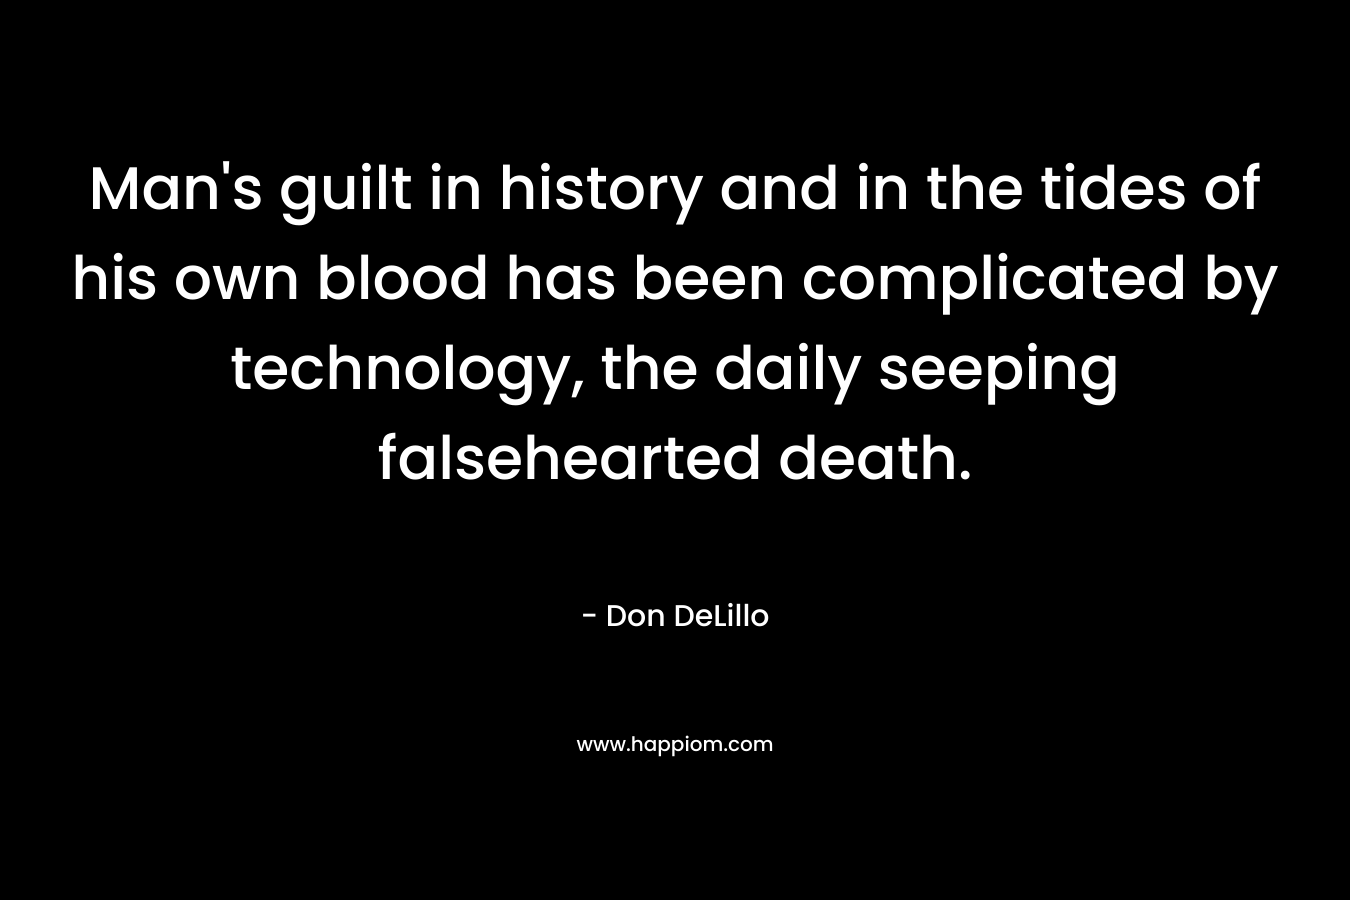 Man’s guilt in history and in the tides of his own blood has been complicated by technology, the daily seeping falsehearted death. – Don DeLillo